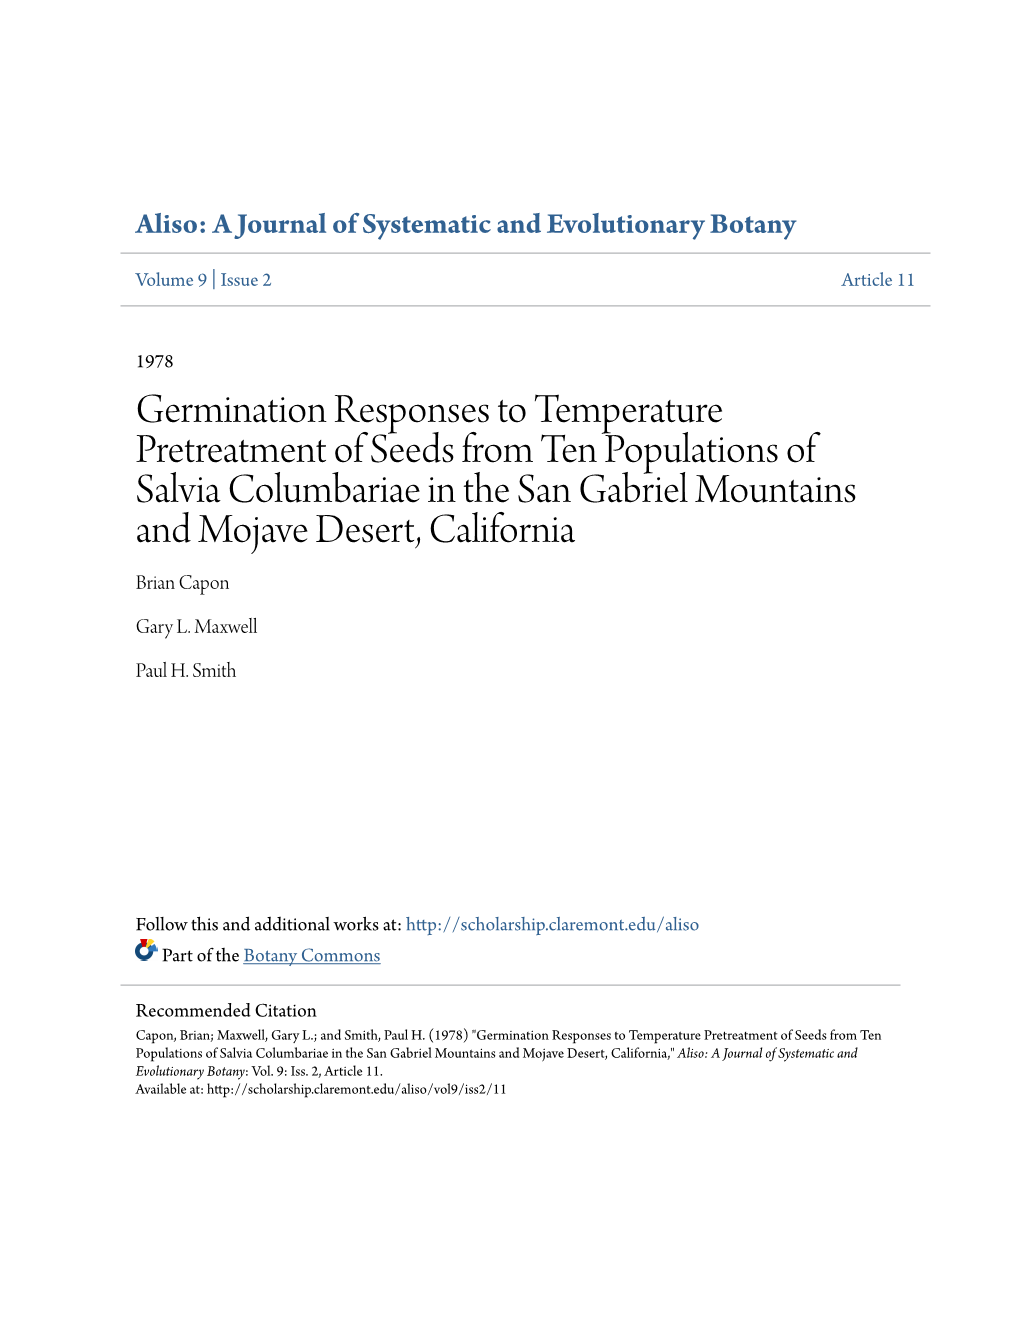 Germination Responses to Temperature Pretreatment of Seeds